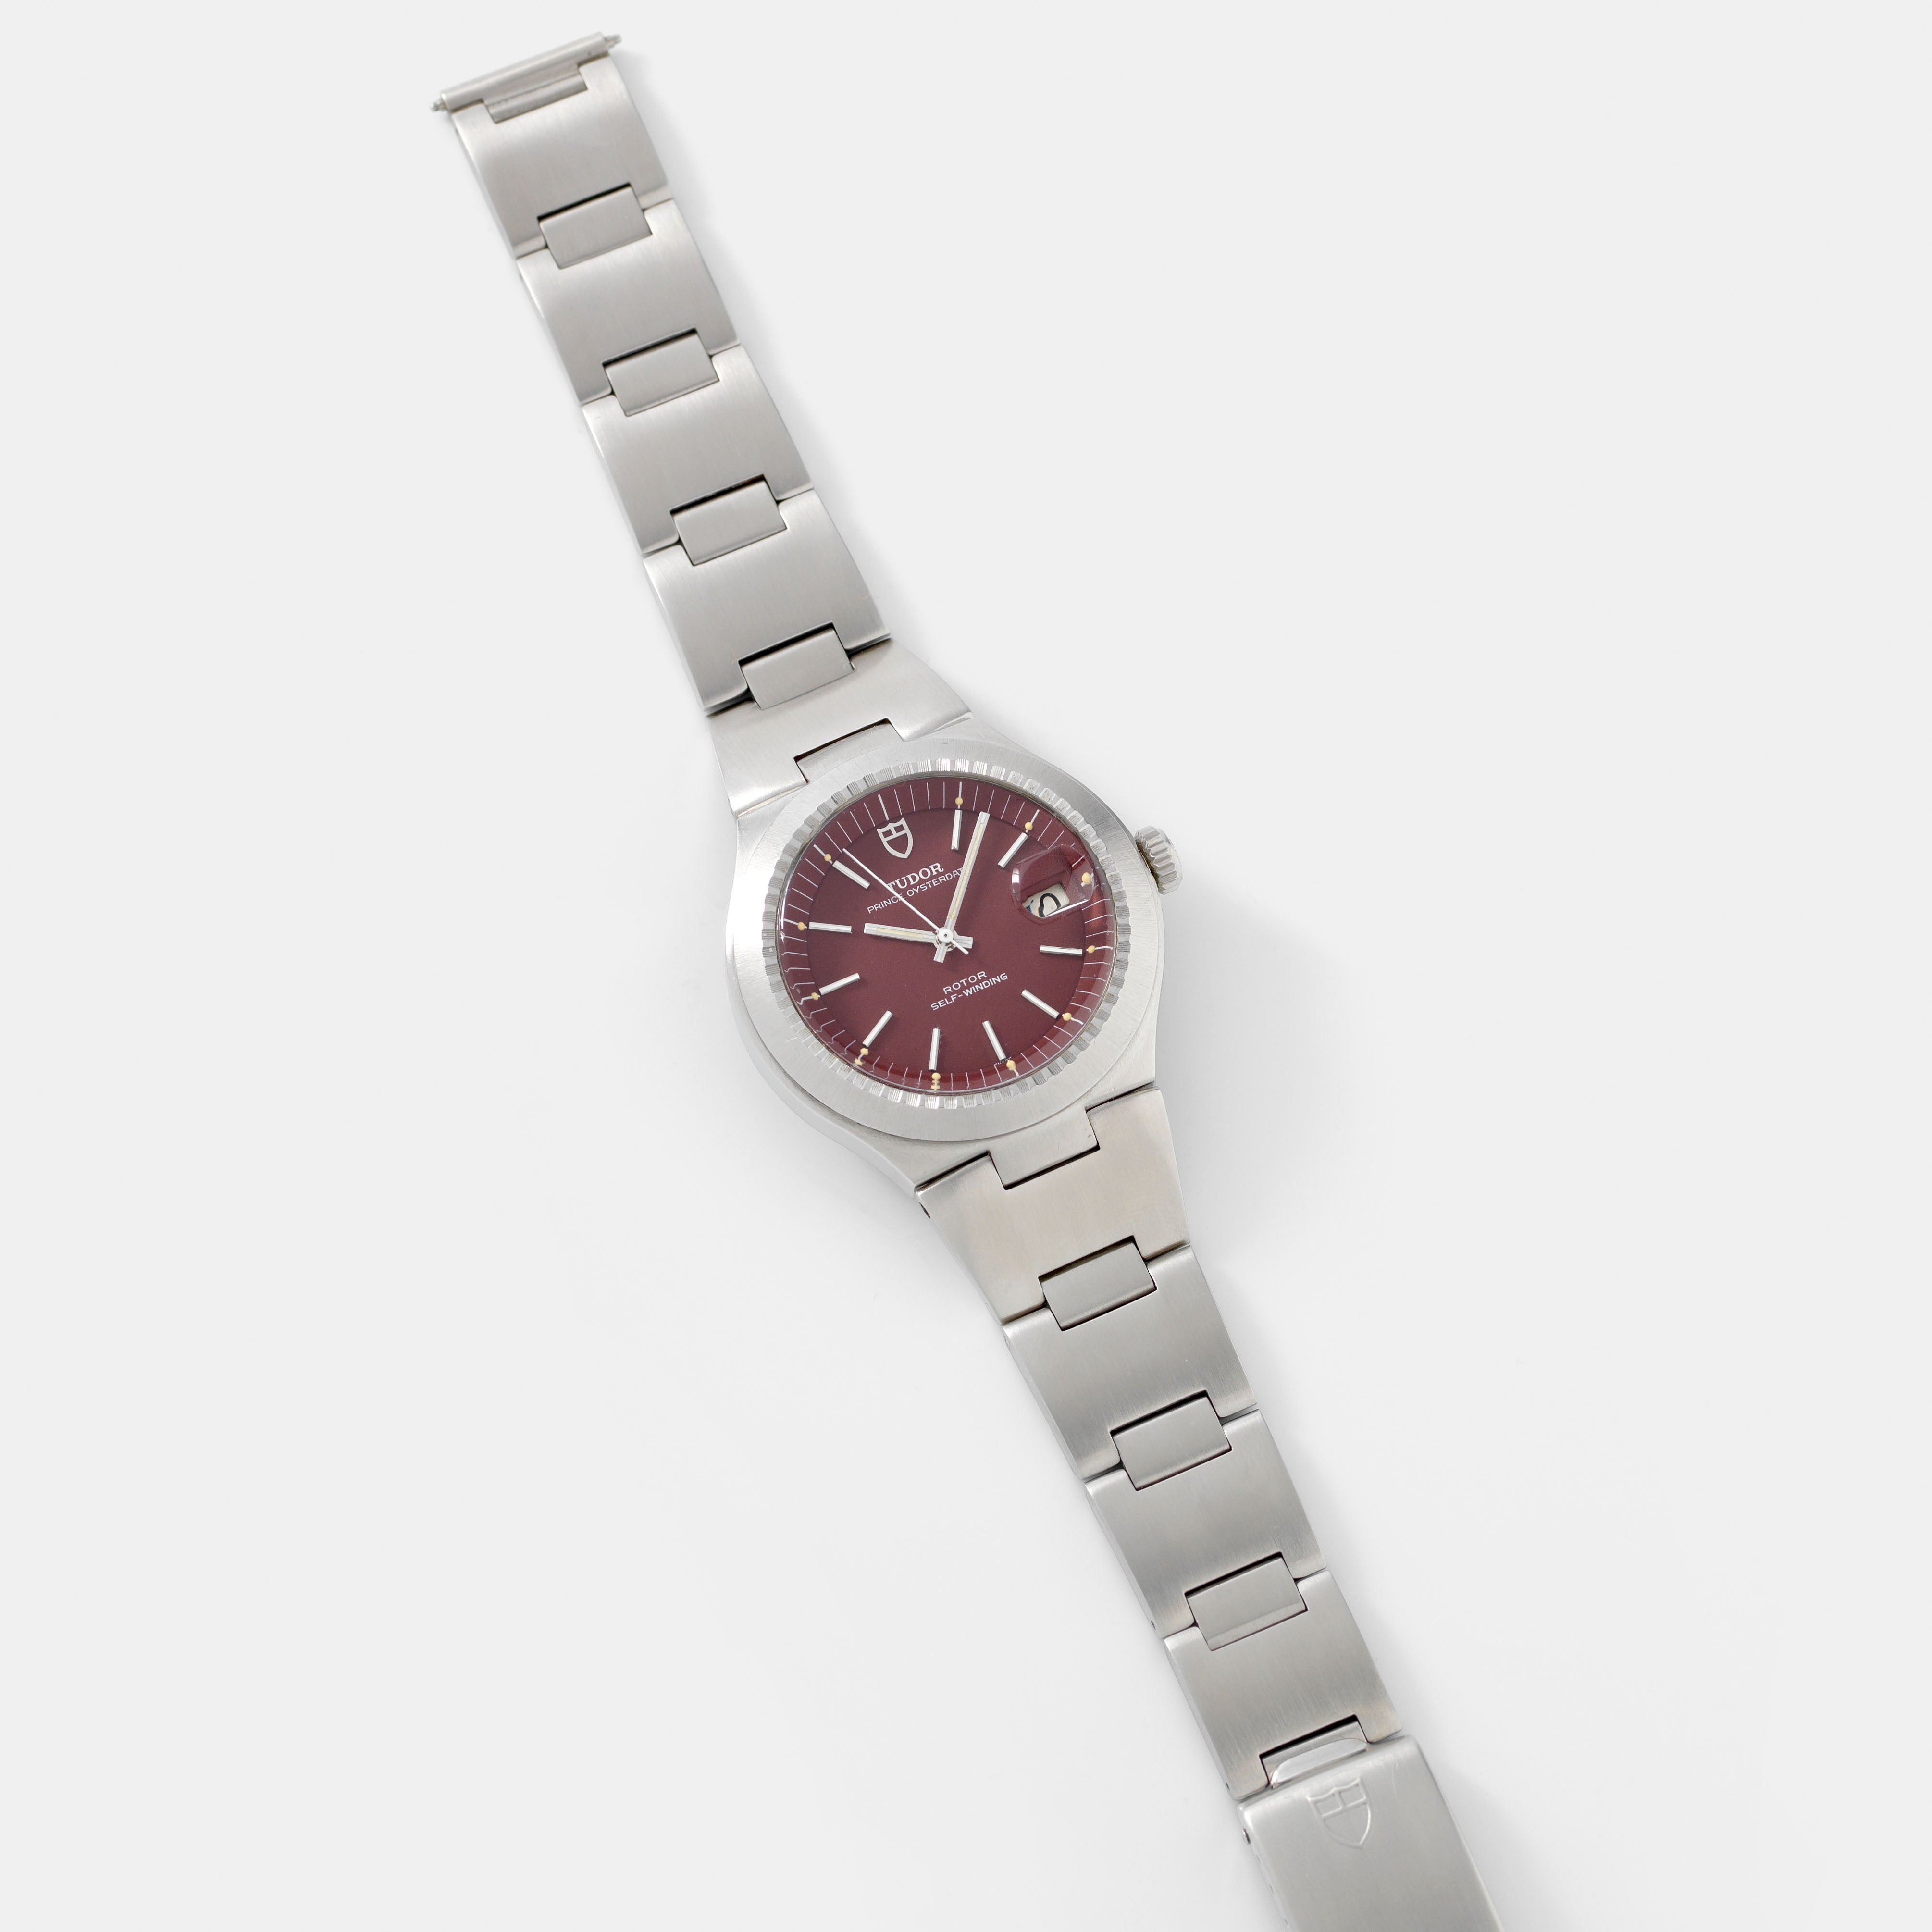 Tudor Prince Oysterdate 9121/0 Burgundy Dial with Papers 